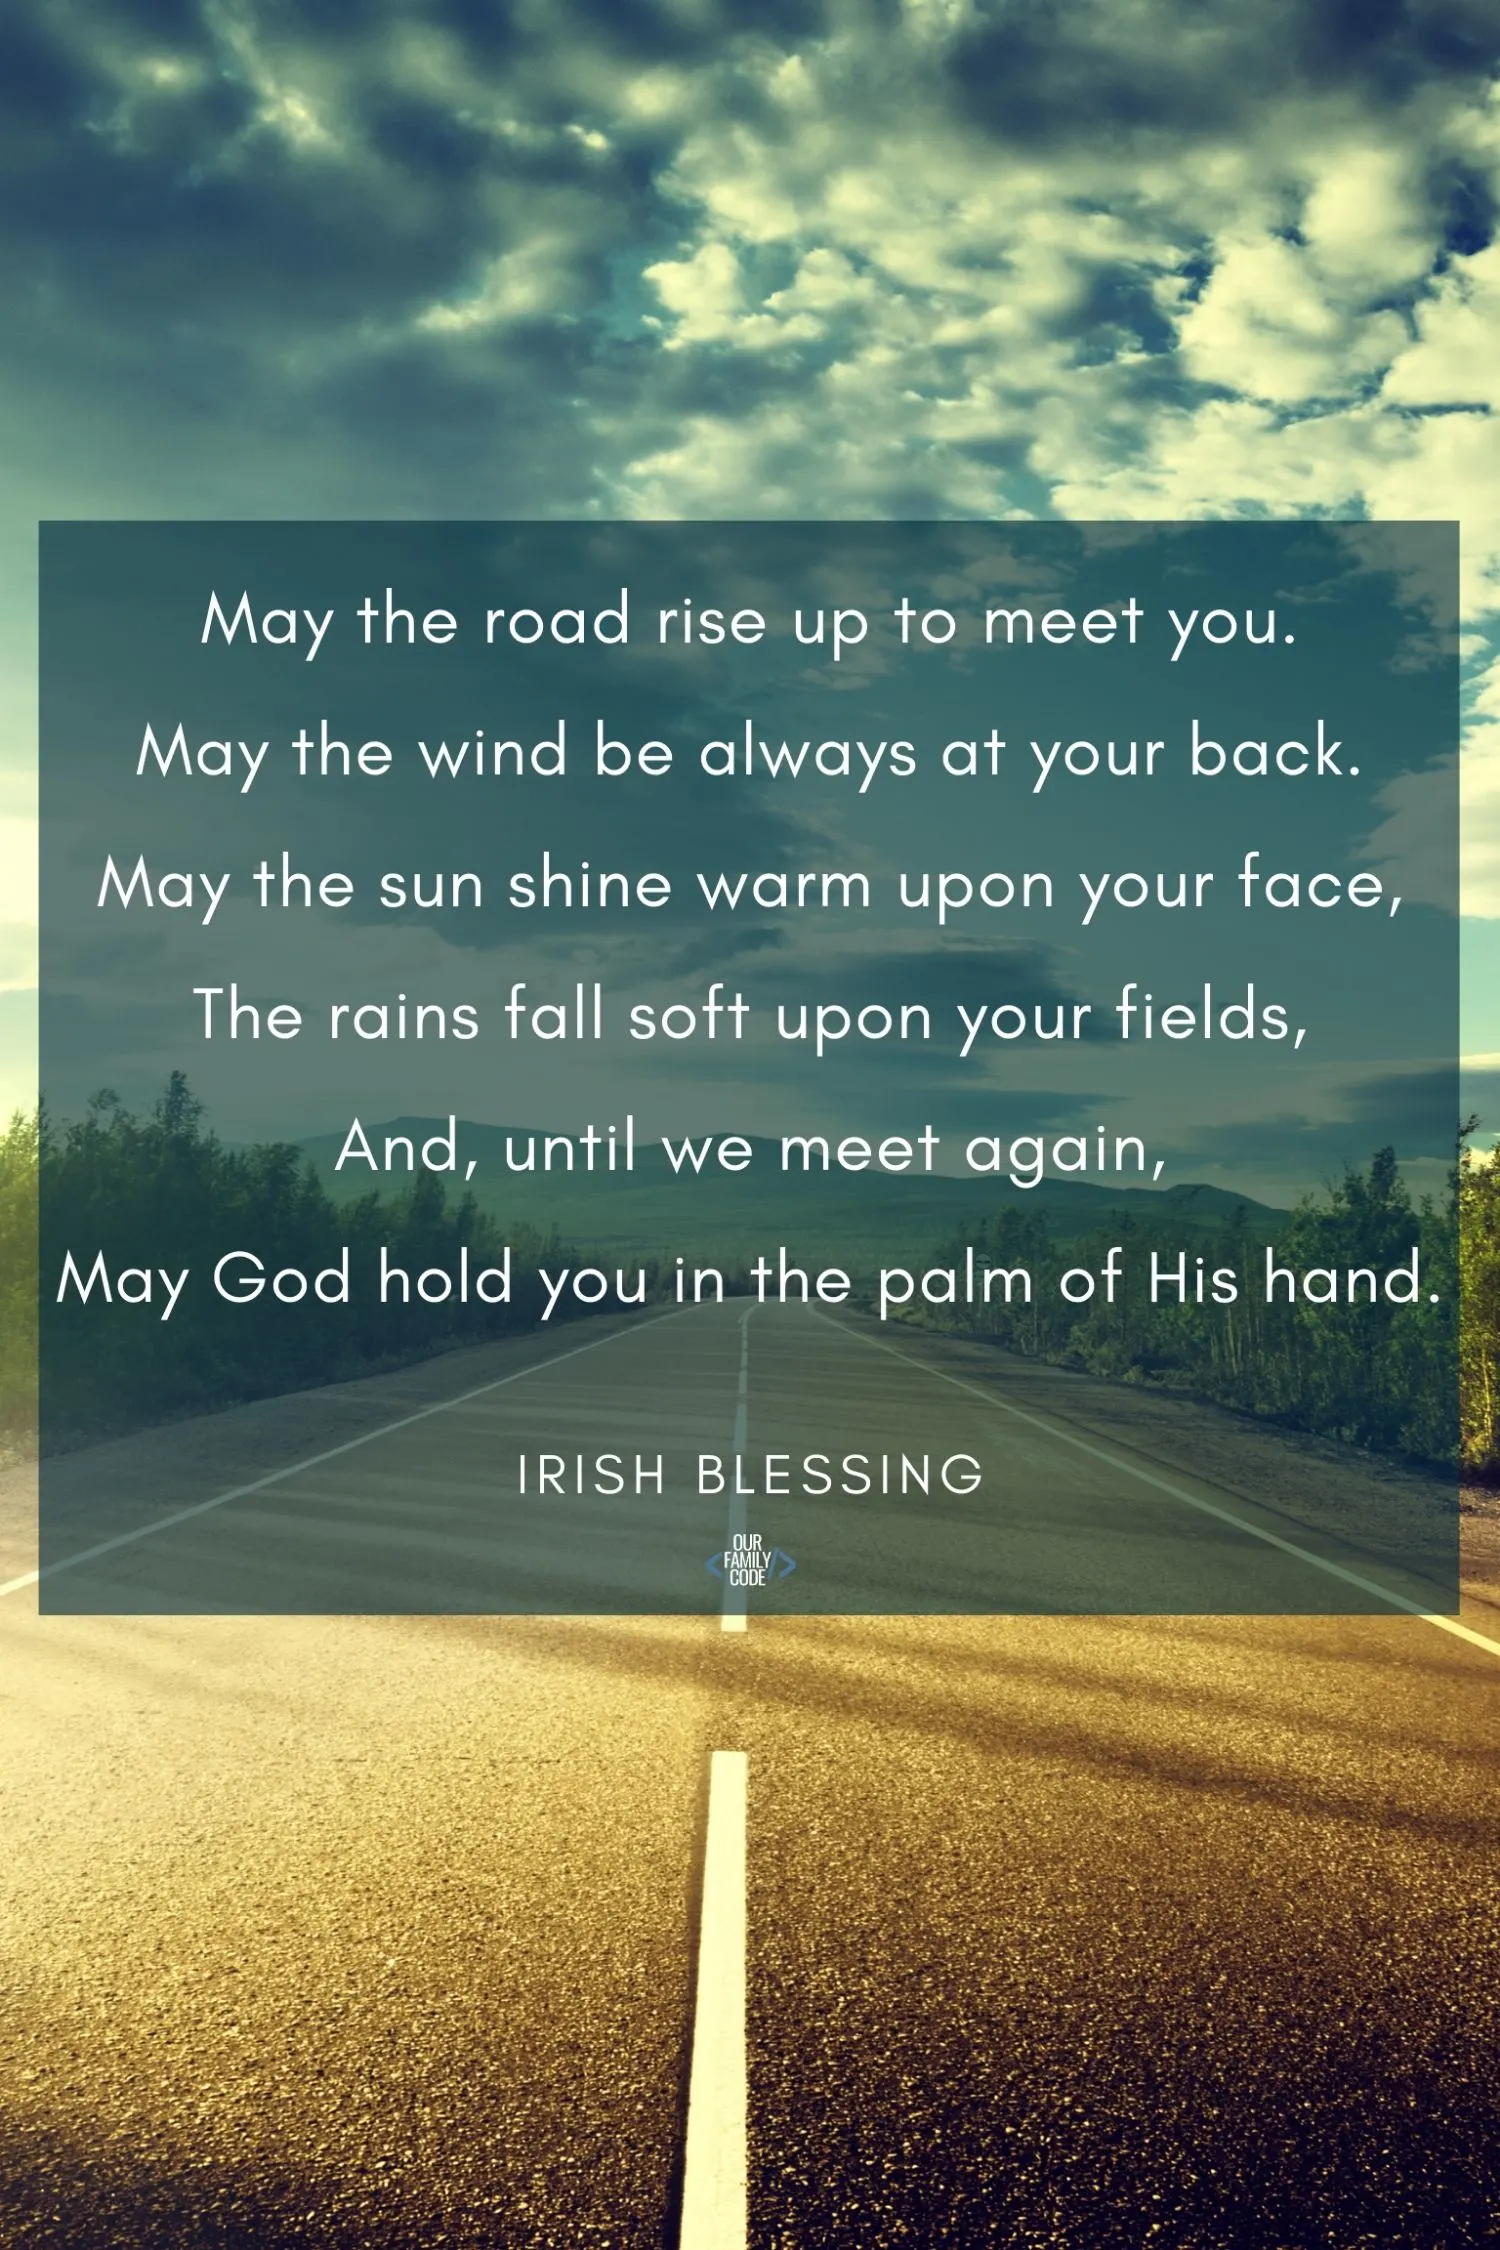 A picture of the Irish Blessing "May the Road Rise Up to Meet You" on a picture of a road.